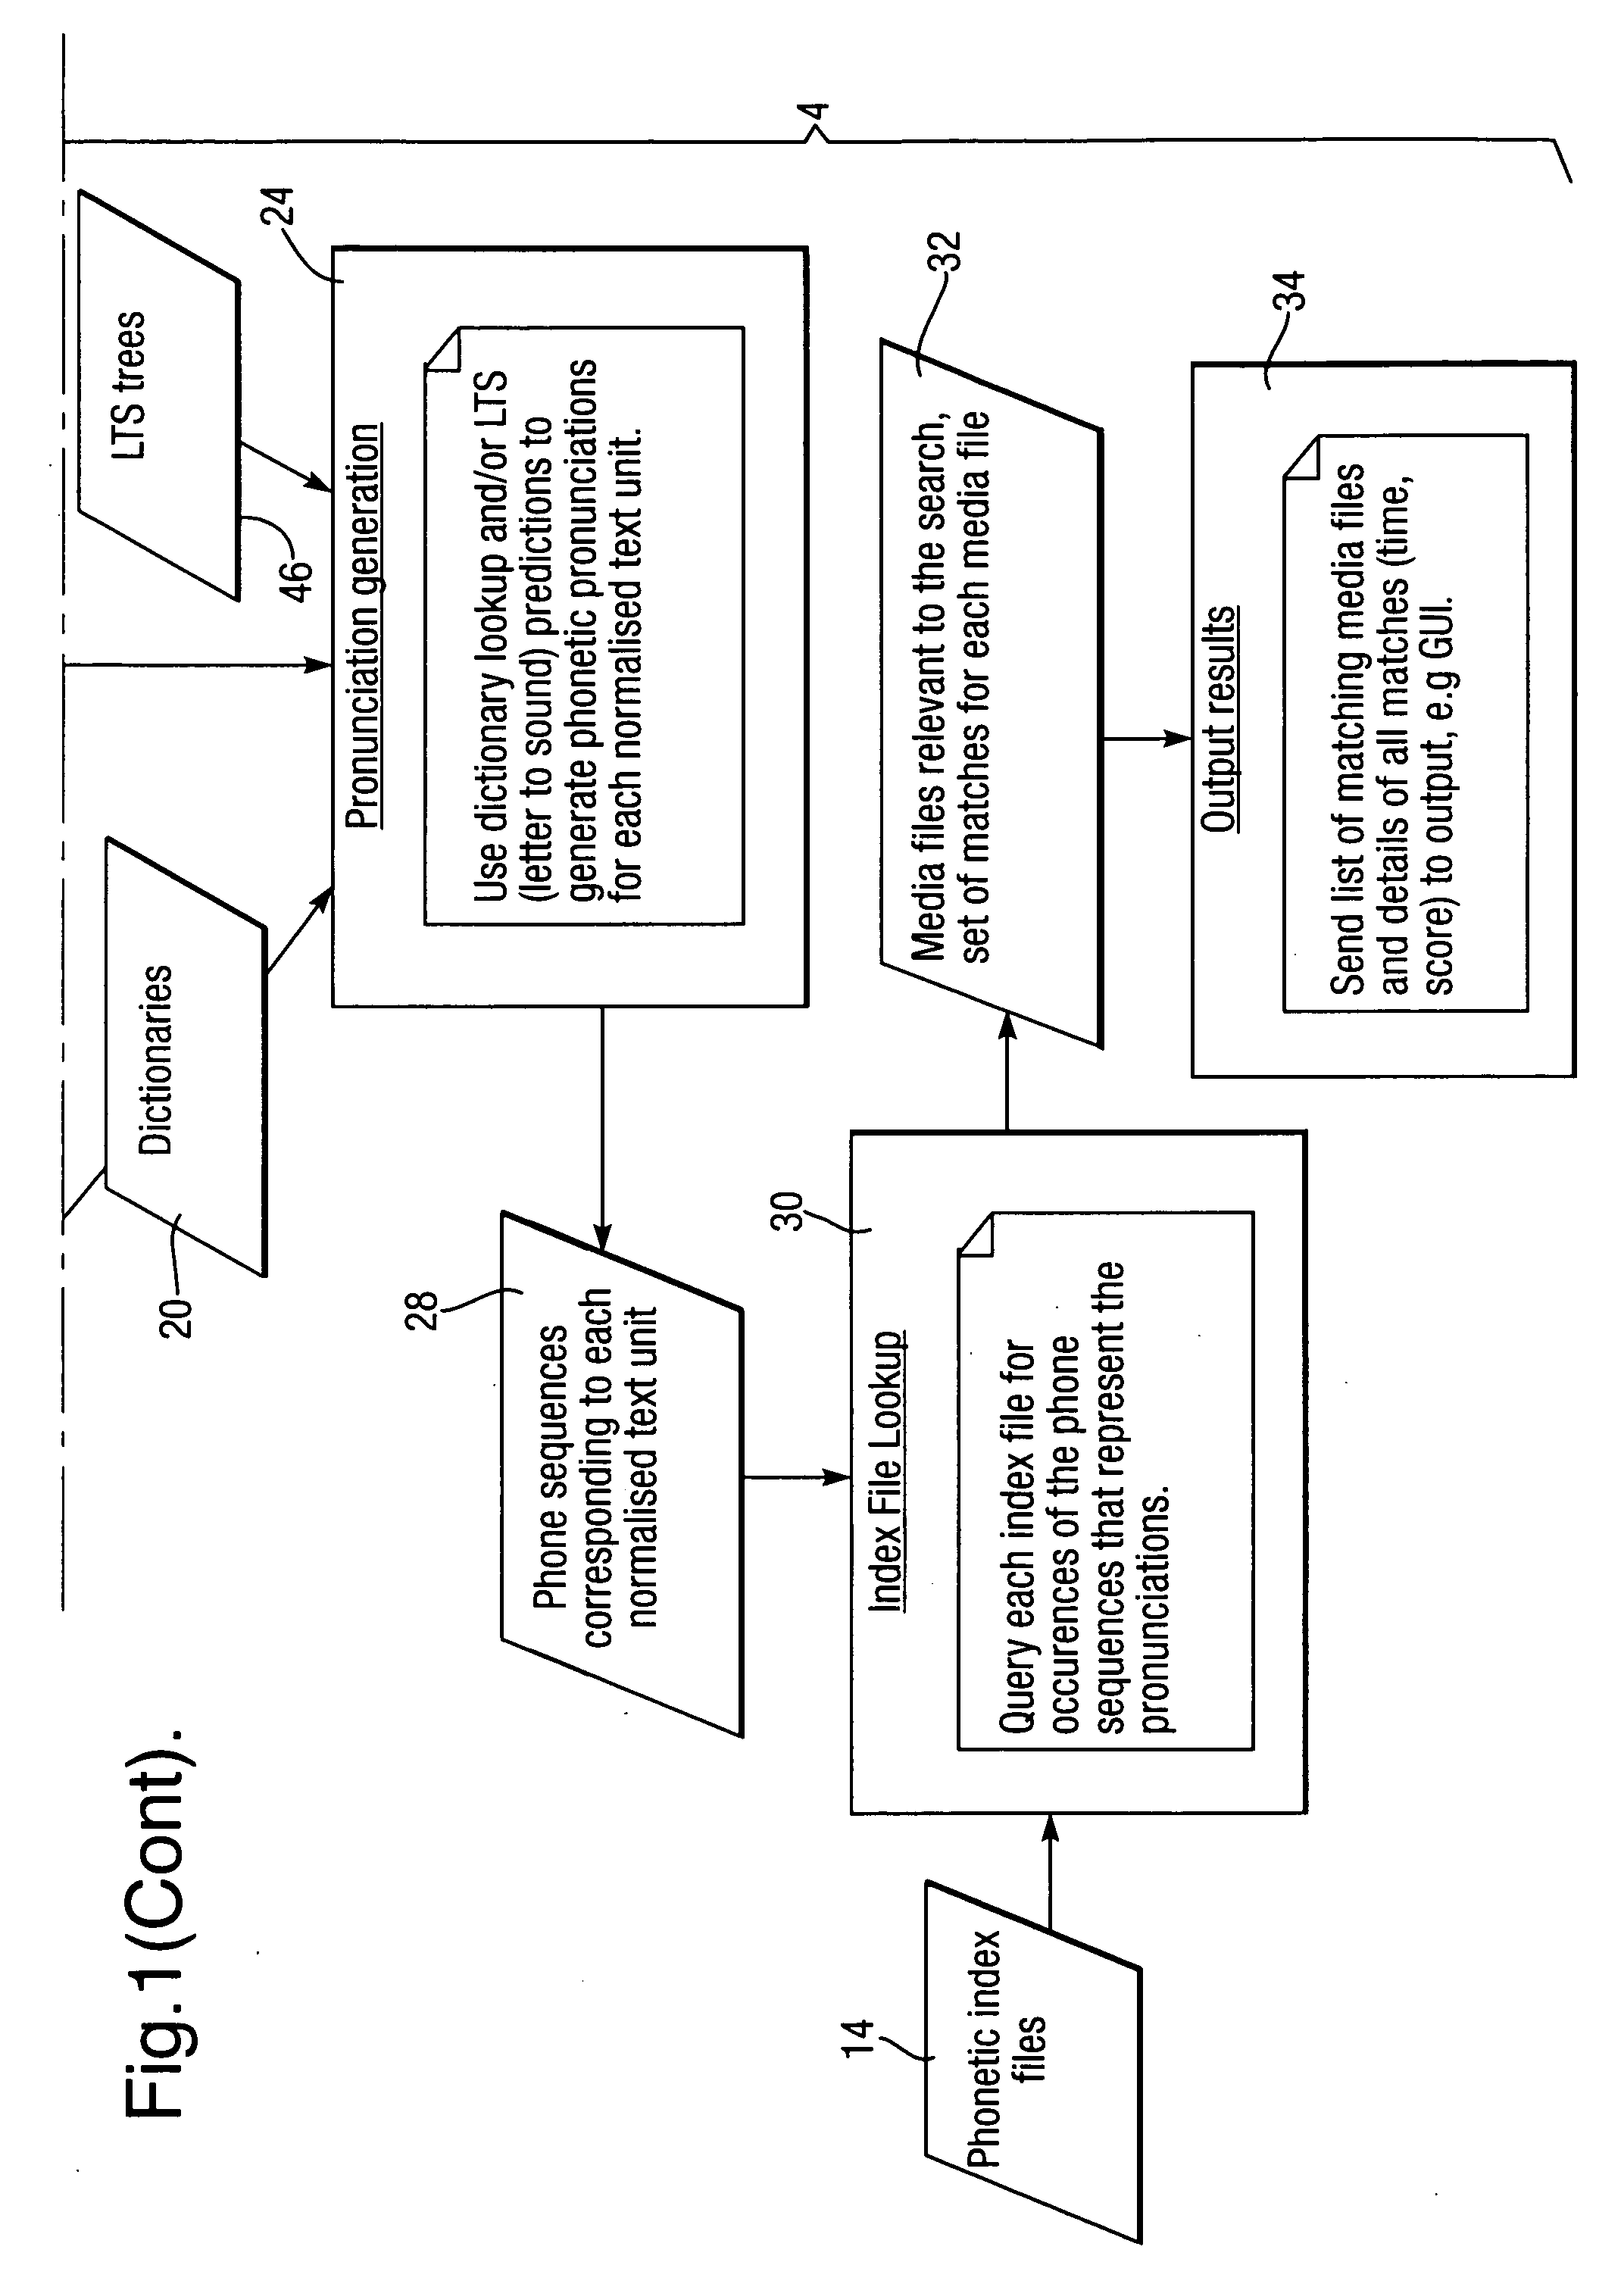 Methods and apparatus relating to searching of spoken audio data